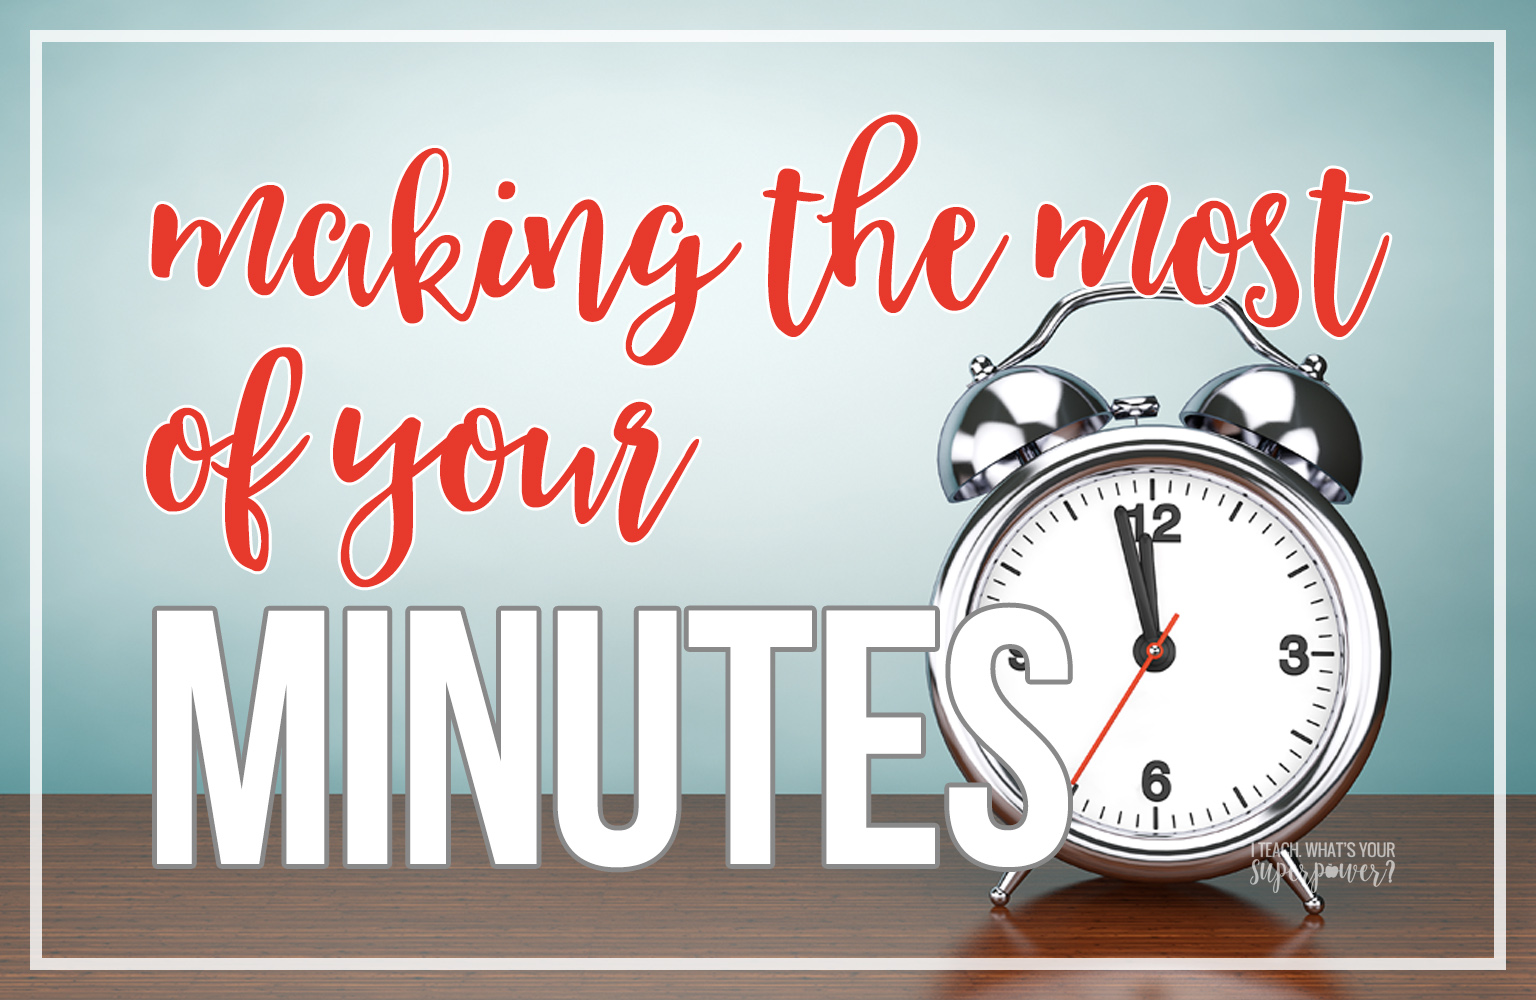 Instructional minutes are like gold! Make the most of your instructional minutes when planning your class schedule.